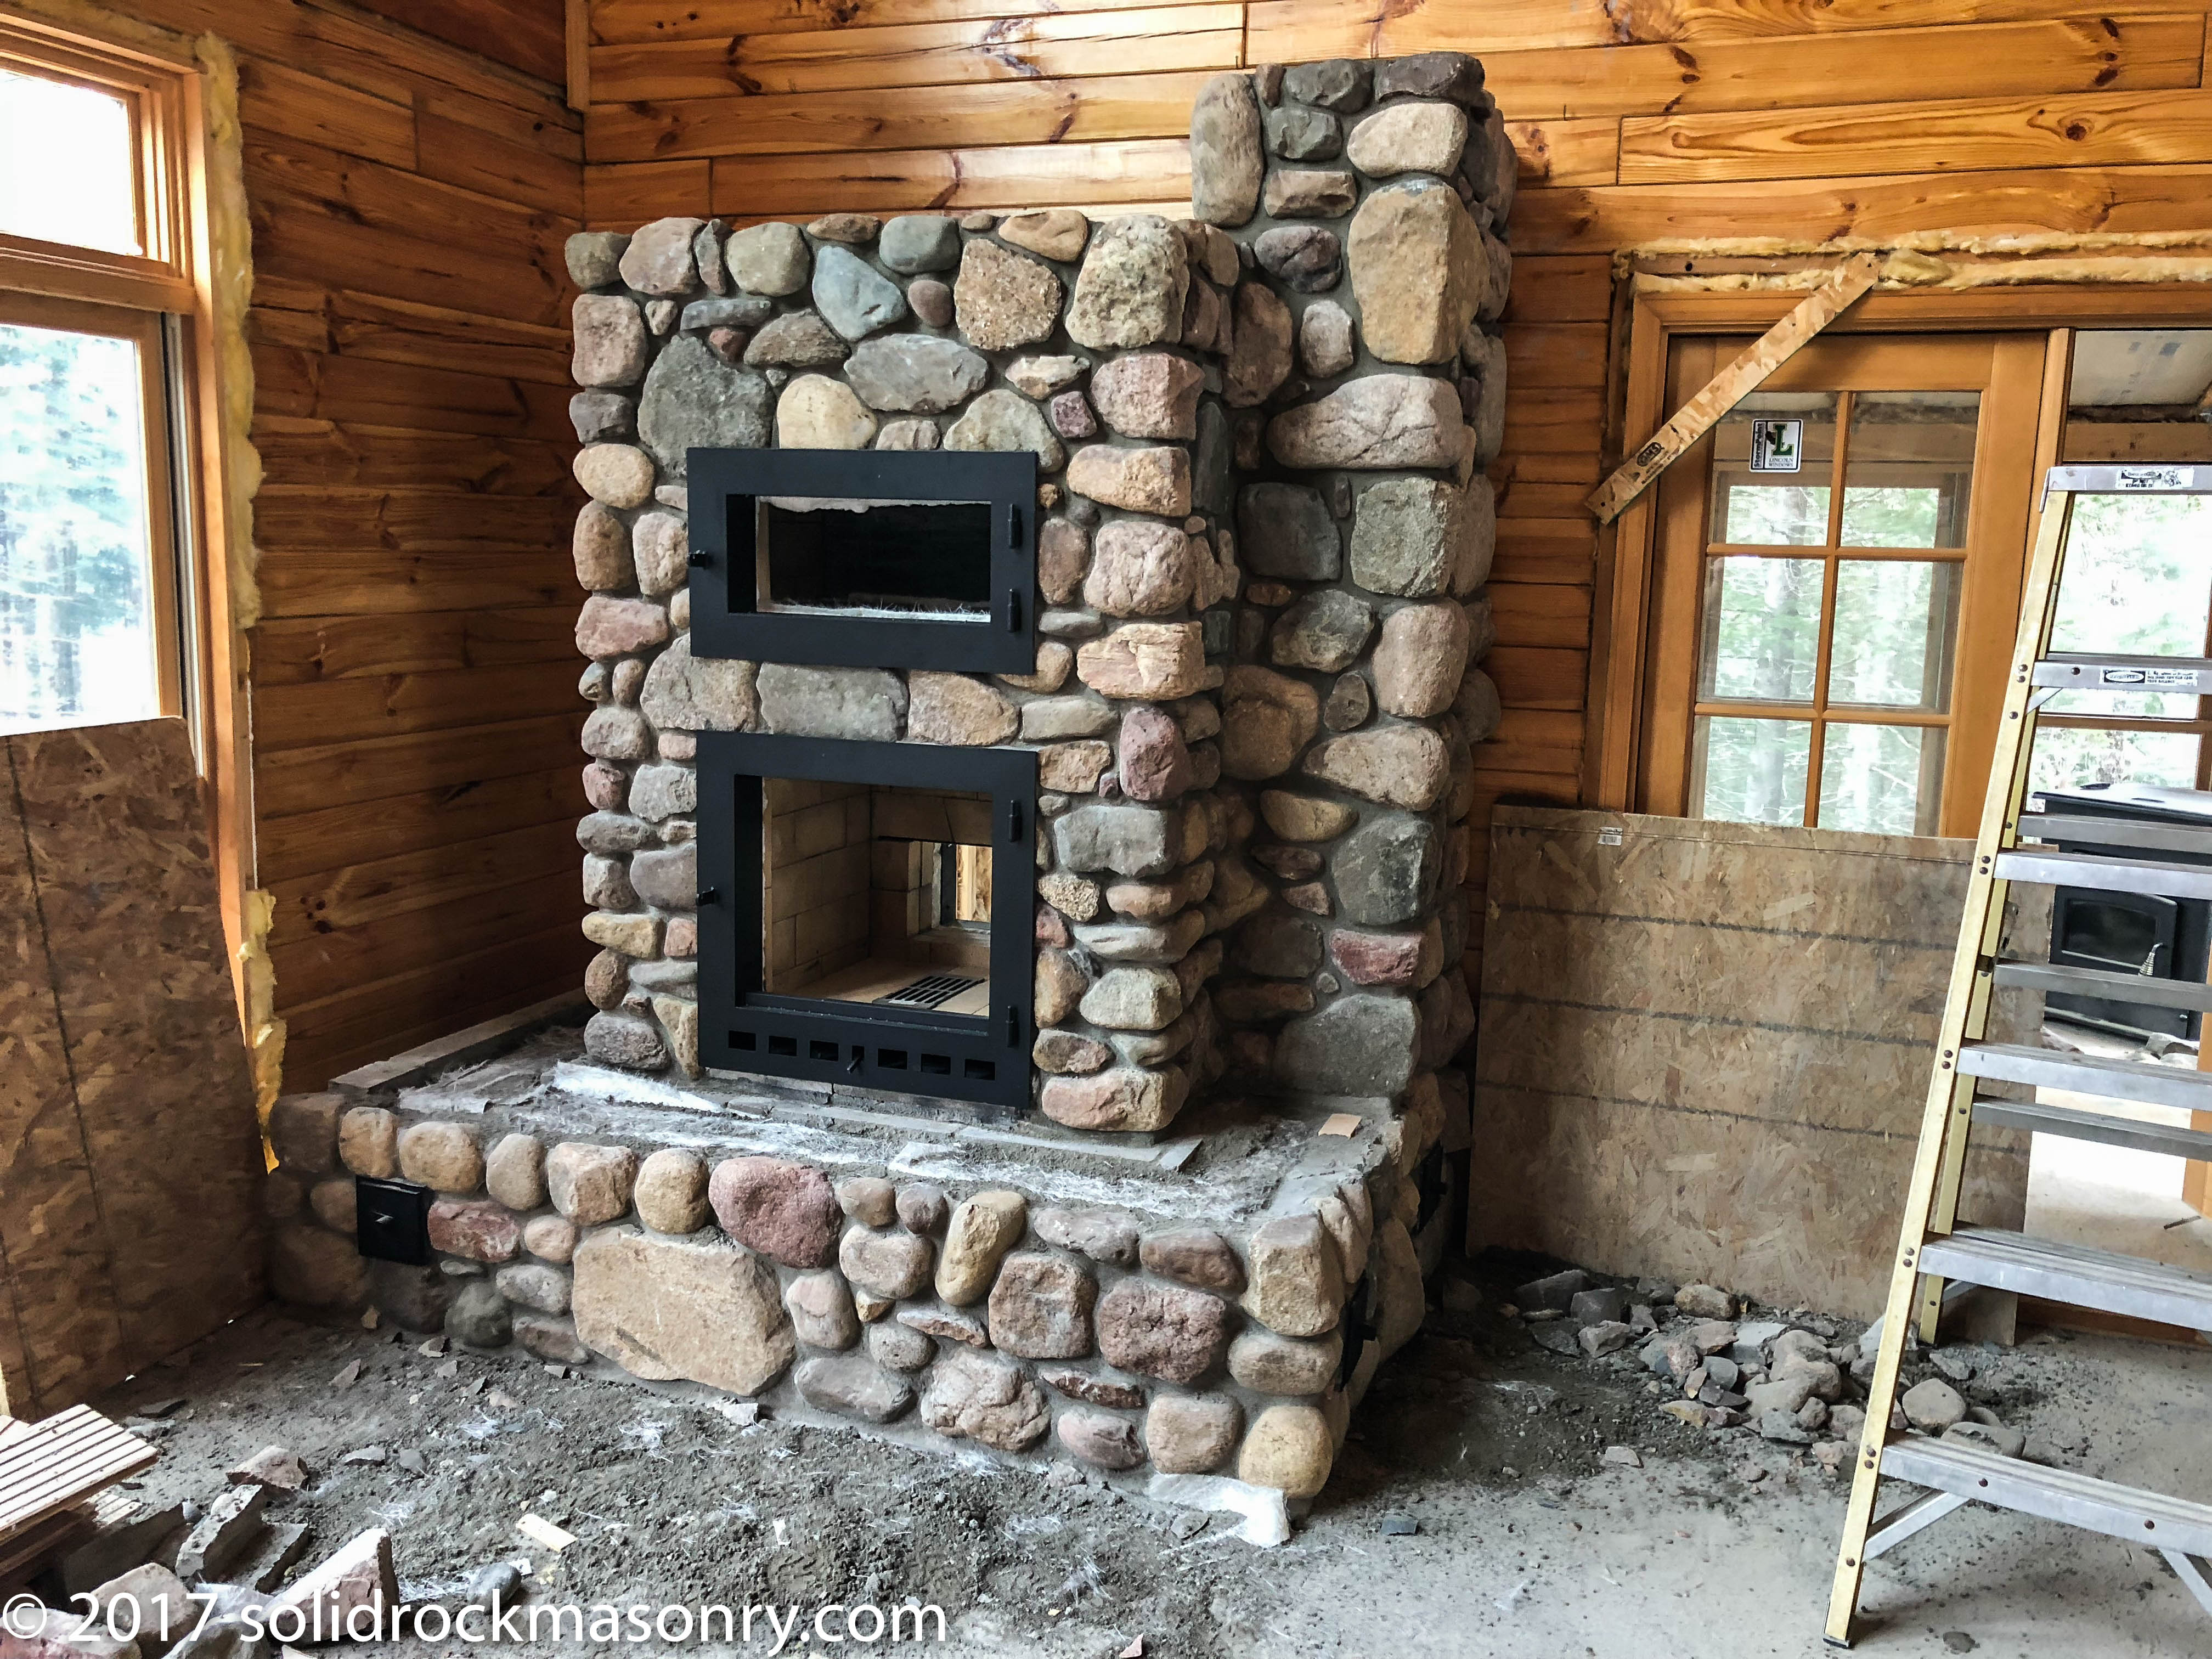 Scantlin SR-22 with white oven, 3 sided heated bench, rear wood loading door and side chimney. Finished with local granite fieldstone.